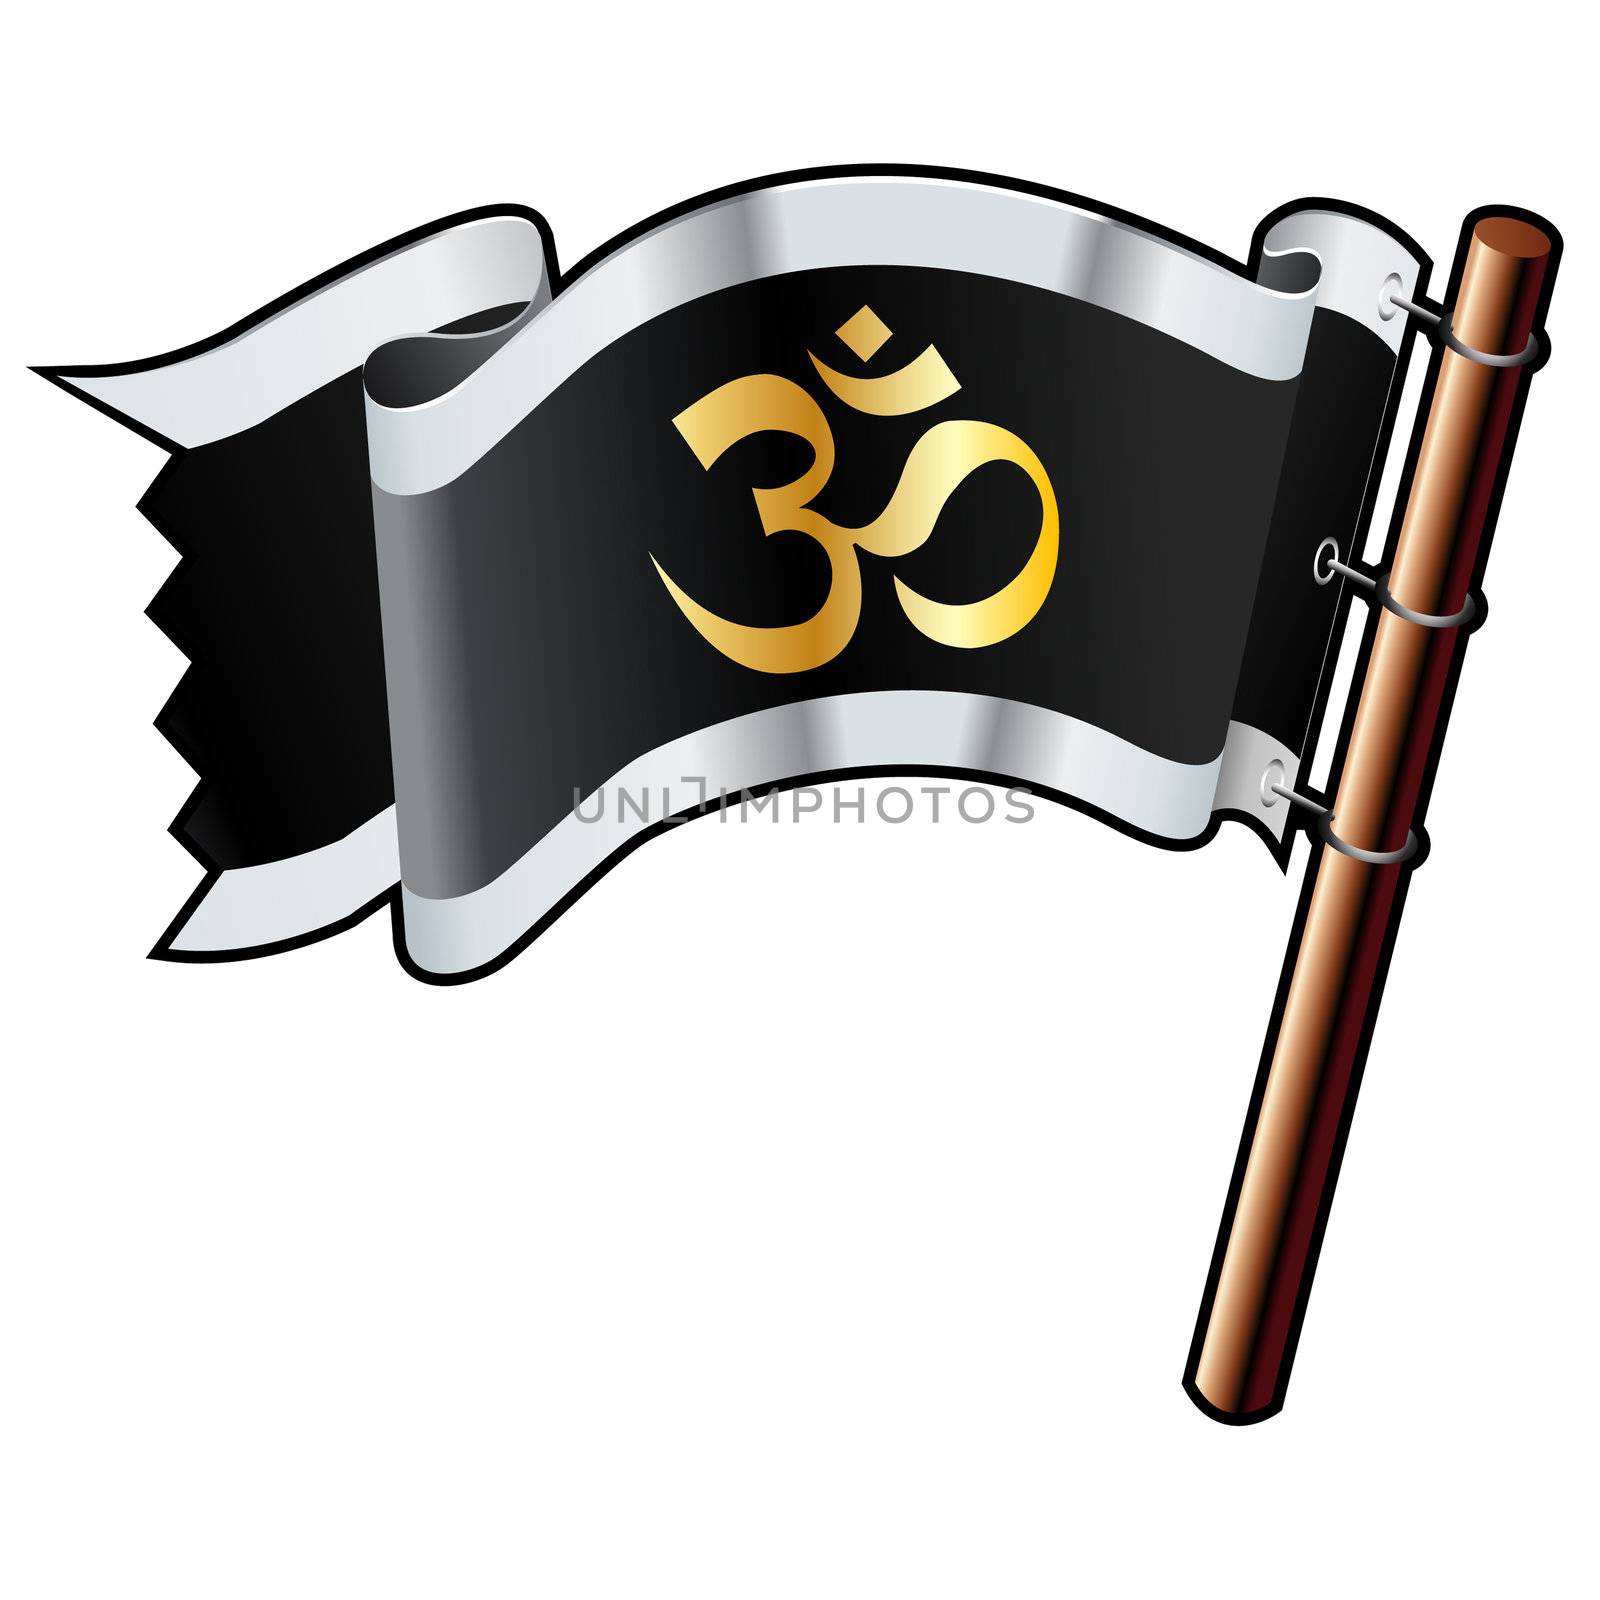 Hindu Om on pirate flag vector by lhfgraphics